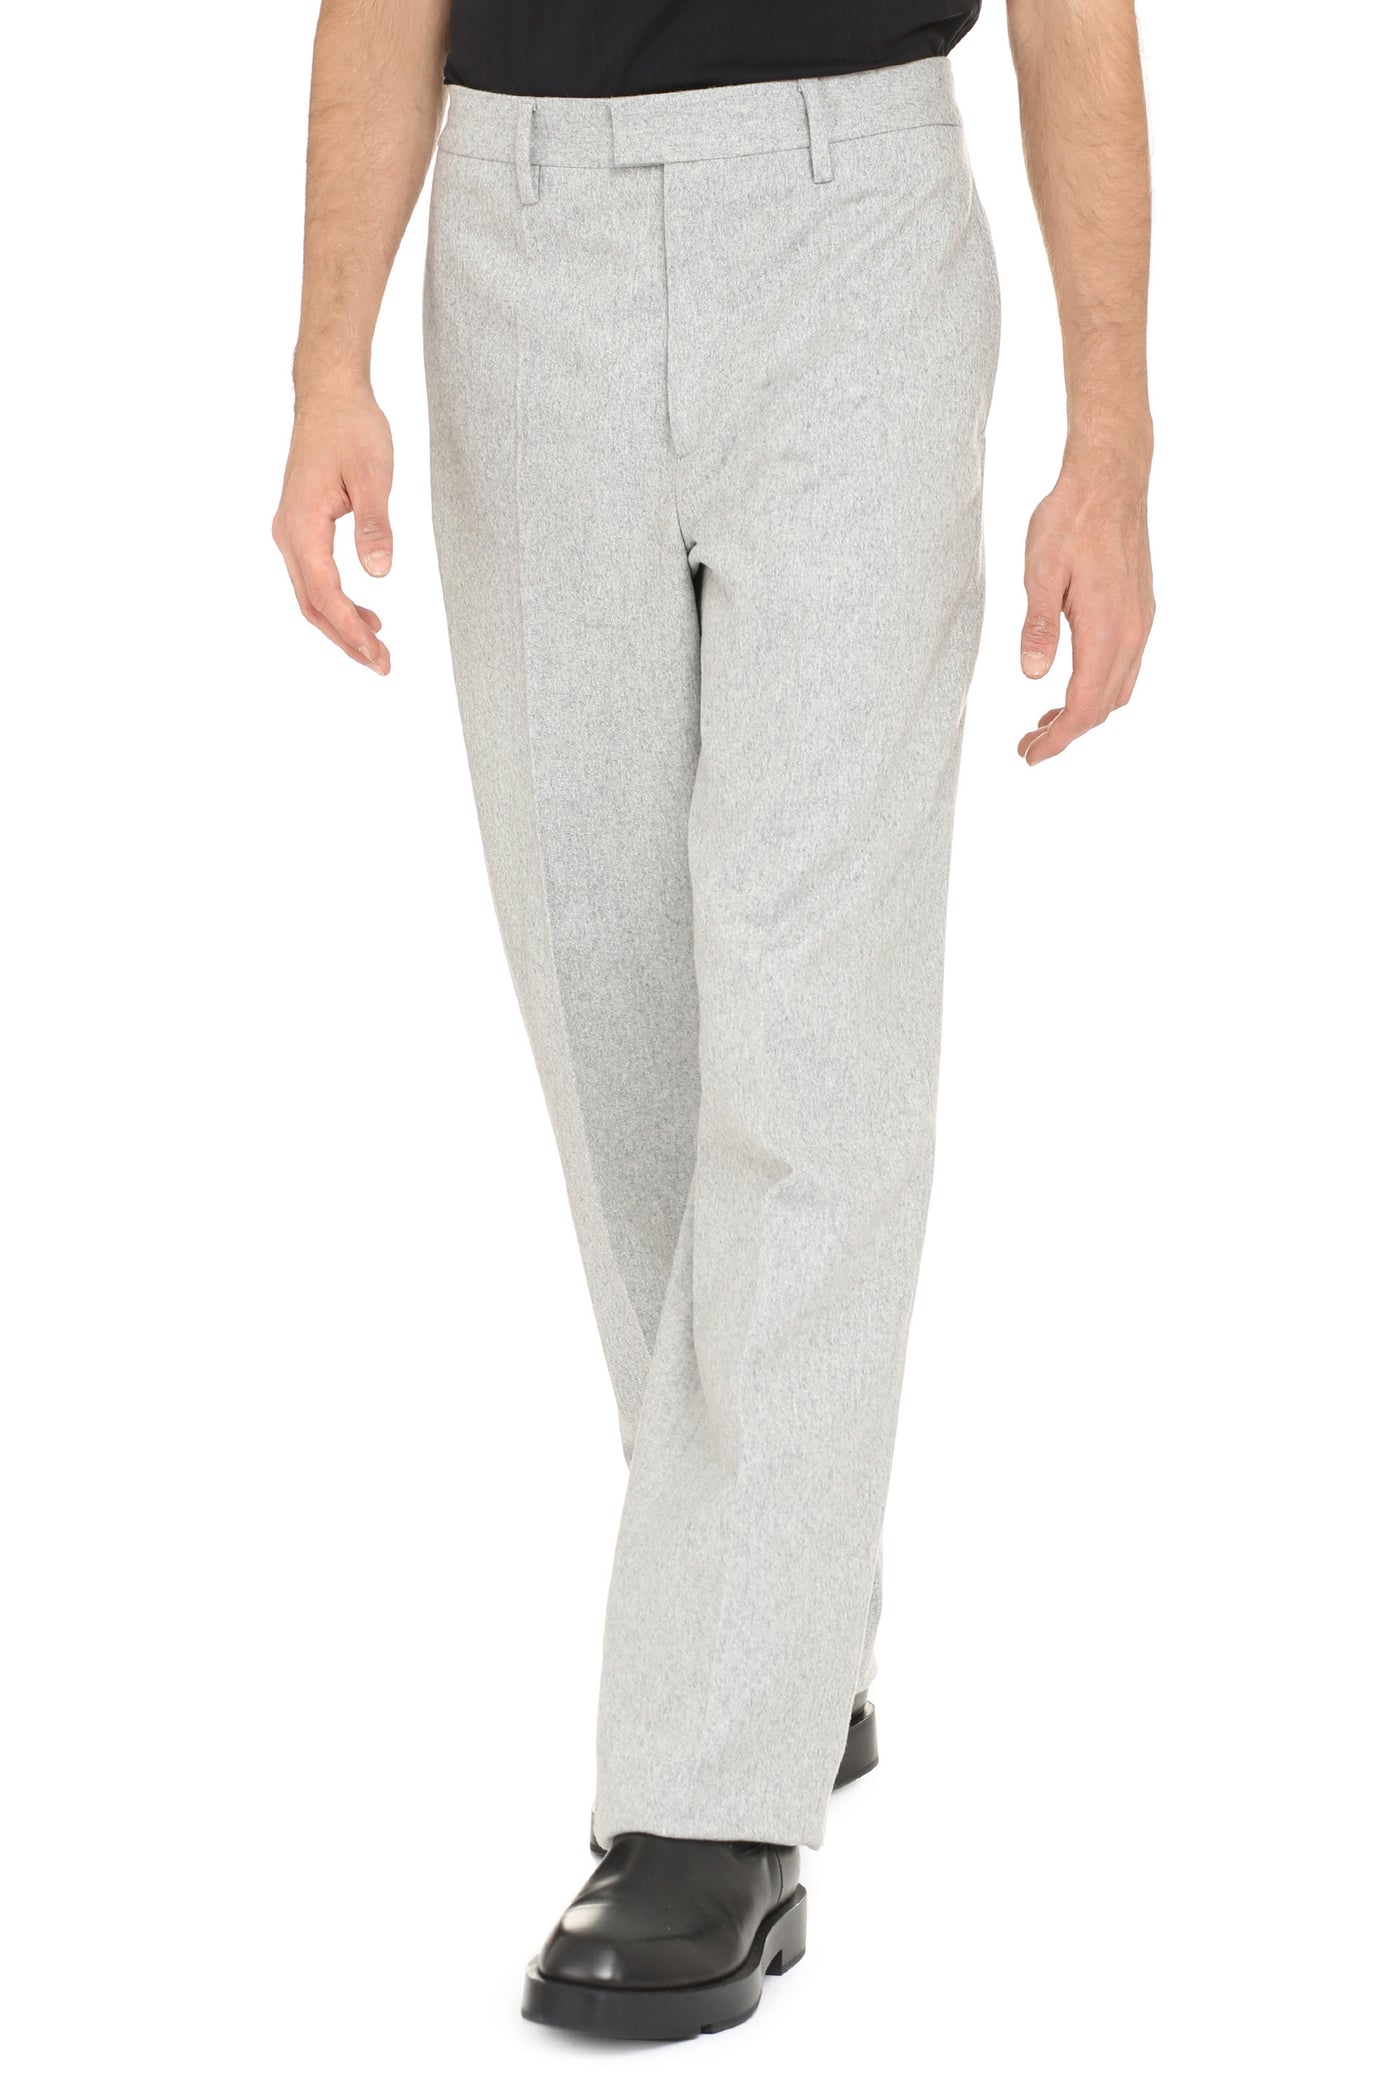 0500 OFF-WHITE WOOL BLEND TROUSERS